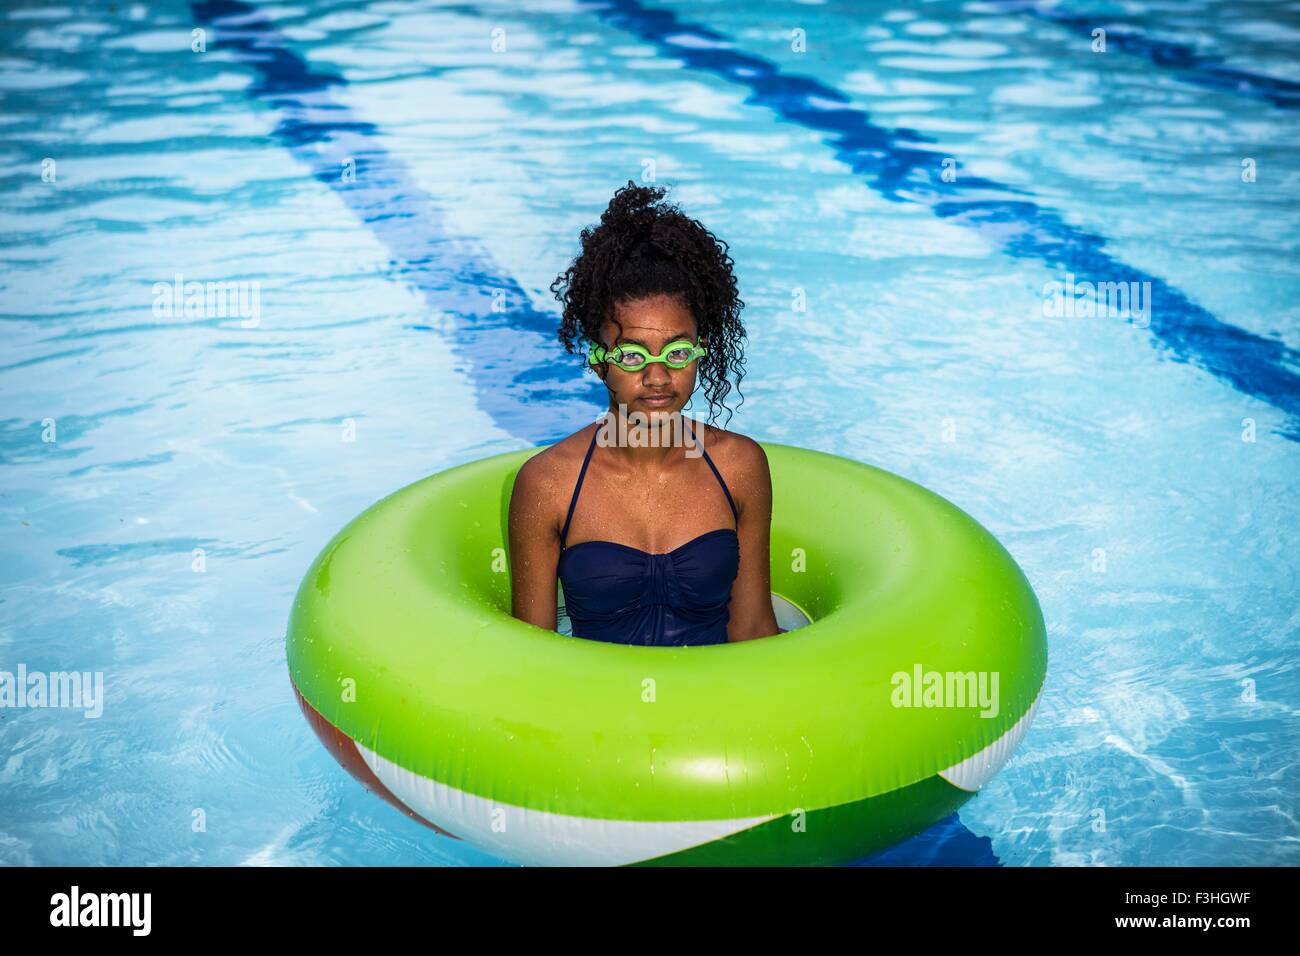 Girl standing in inflatable ring in swimming pool, wearing goggles looking at camera Stock Photo